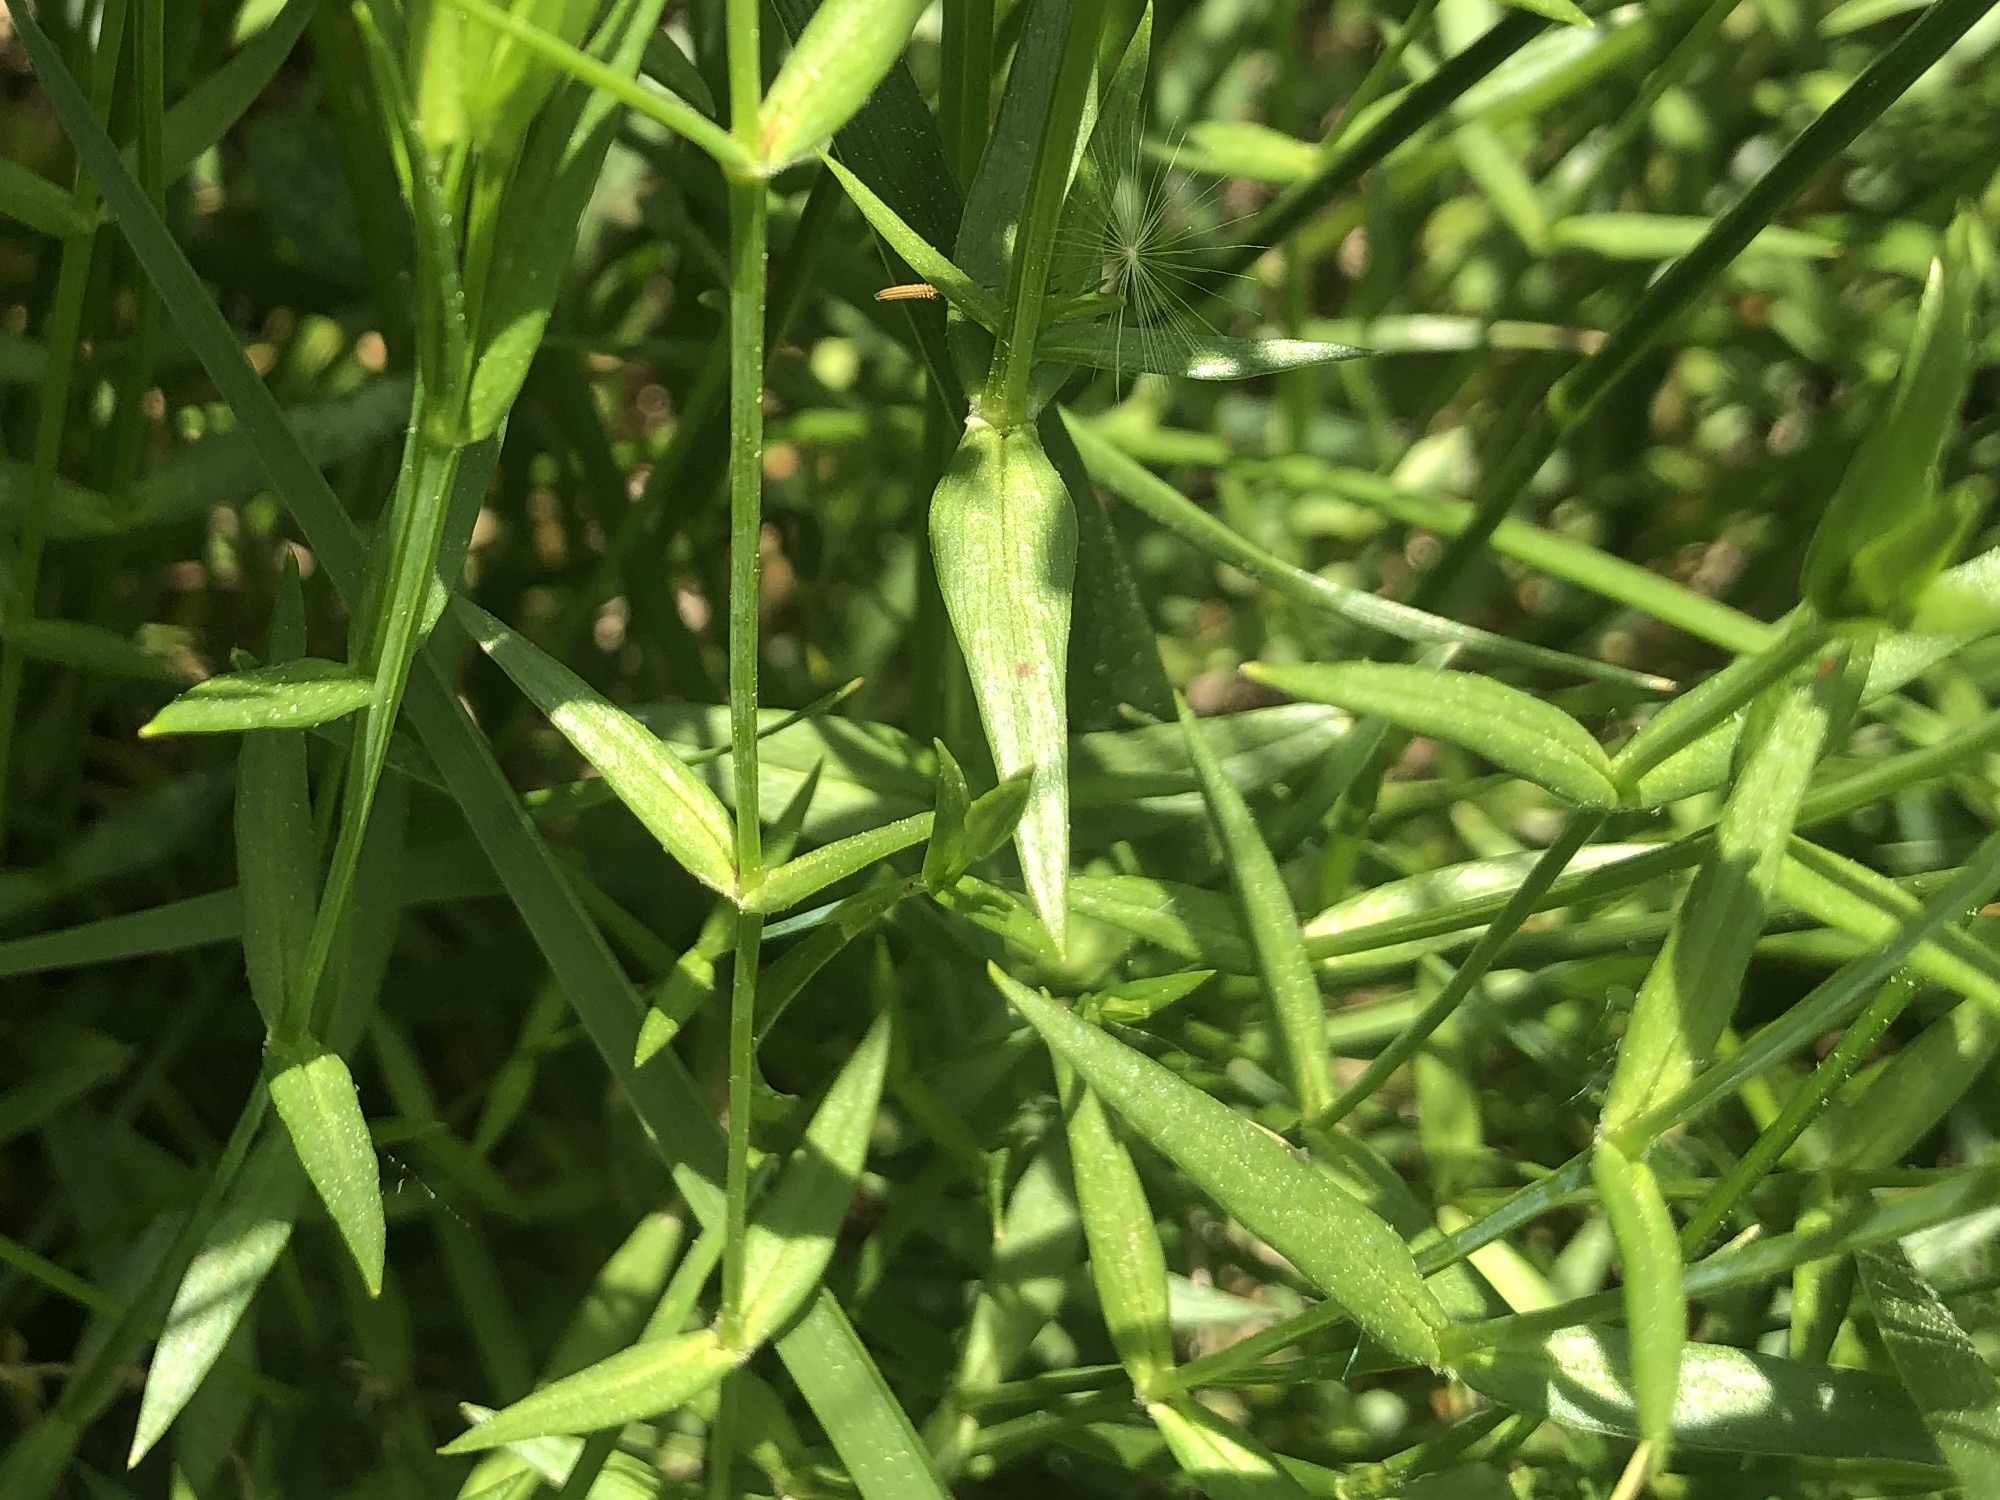 Common Stitchwort stems and leaves in a grassy clearing along the bike path between Odana Road and Midvale Boulevard in Madison, Wisconsin on June 3, 2022.